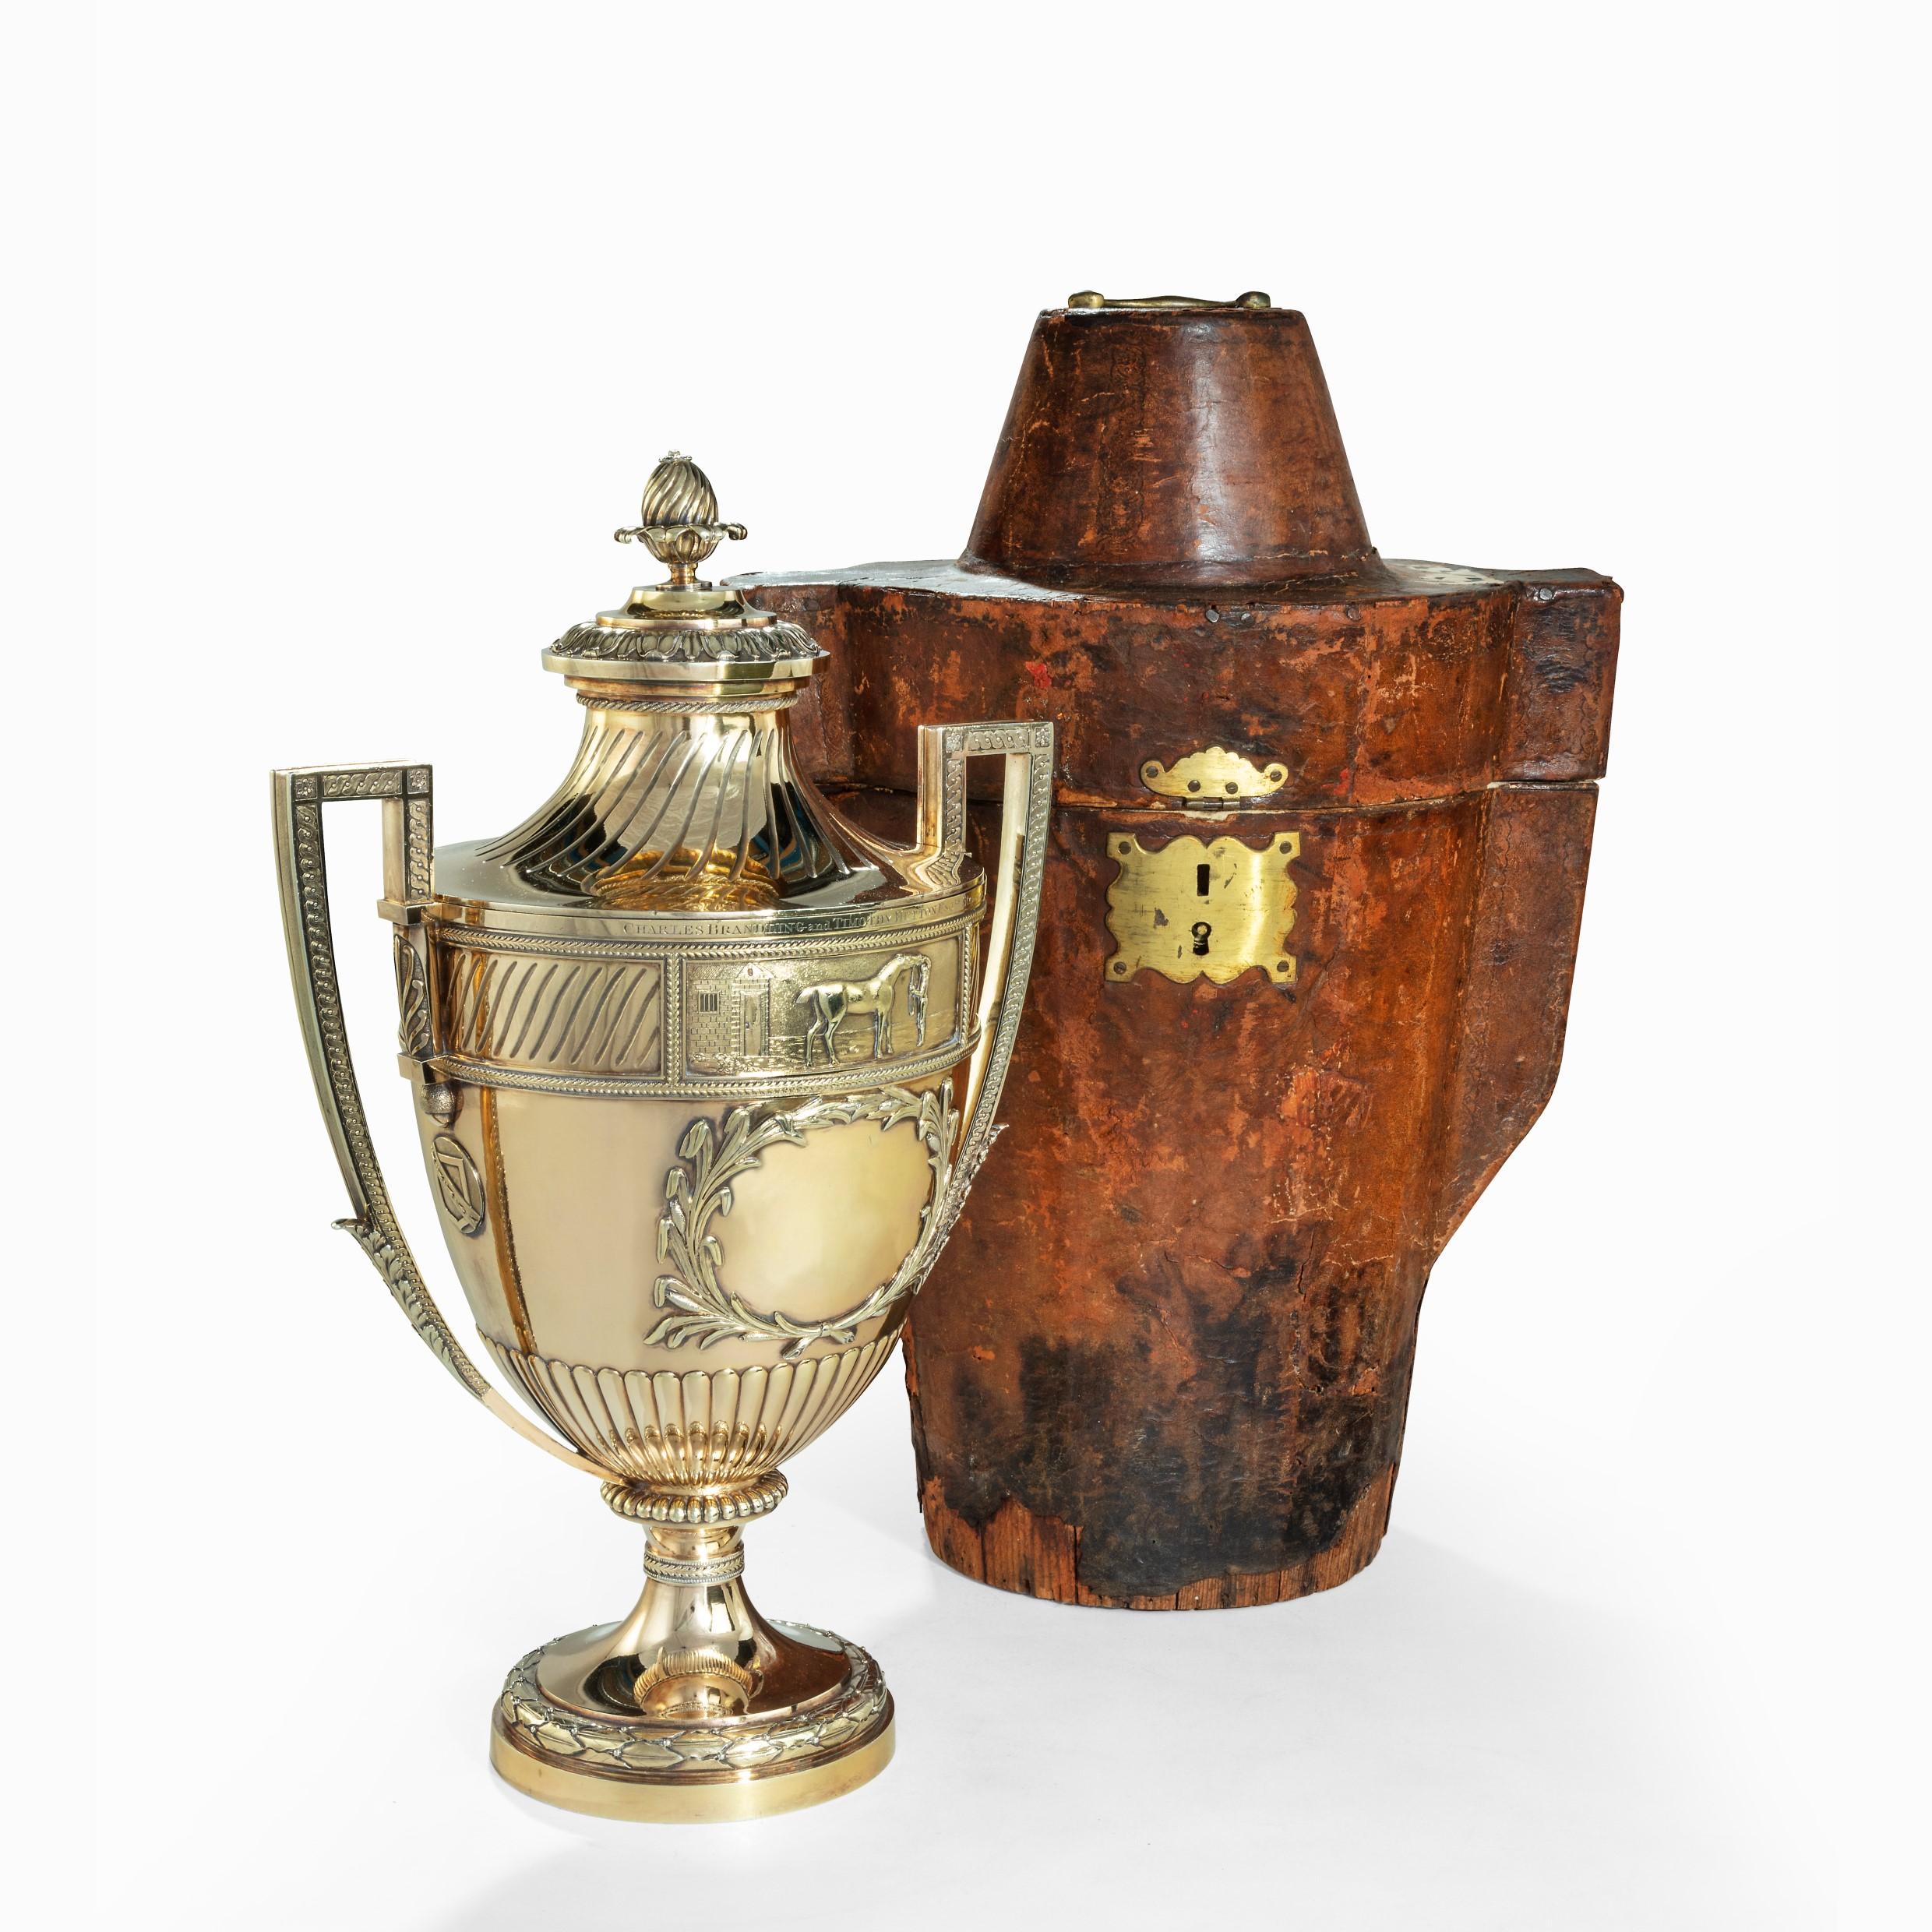 This exceptional silver-gilt trophy was made by Paul Storr in 1802, by arrangement with the London retailer Robert Makepeace. It is in the form of a classical footed cup with squared handles and separate shaped cover. It is embossed, chased and